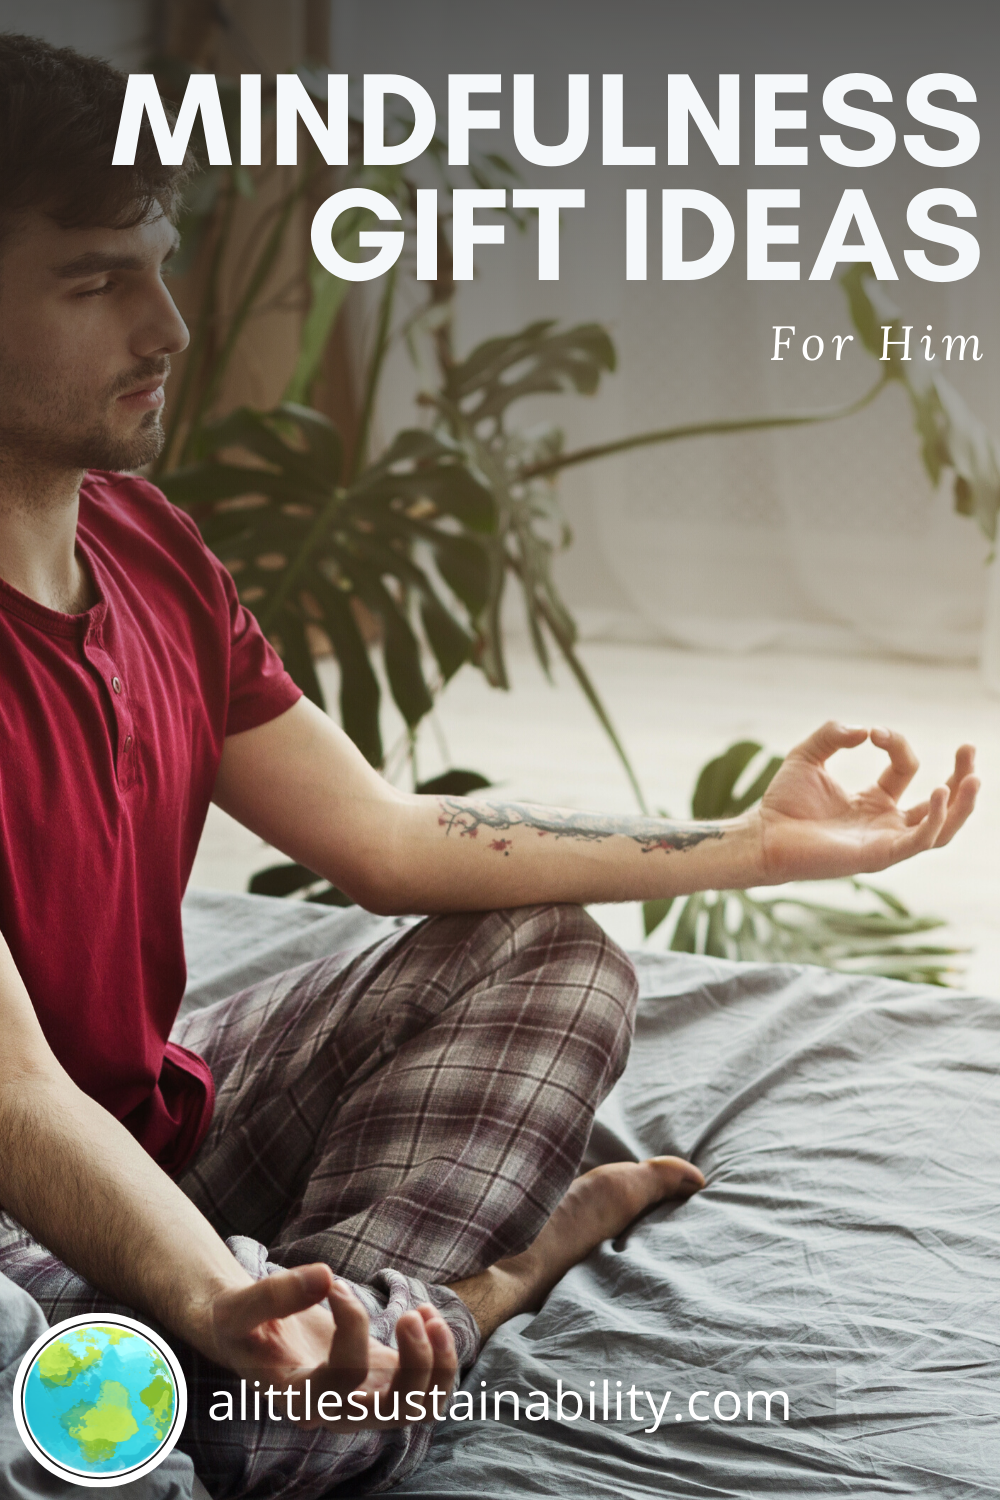 Mindfulness gifts for him. Gifts perfect for a meditator for his meditation corner and mindfulness practice. From meditation books, to zen decor inspiration, to comfortable clothing, and more. #presentsforboyfriends #christmasgiftideas #anniversaygift